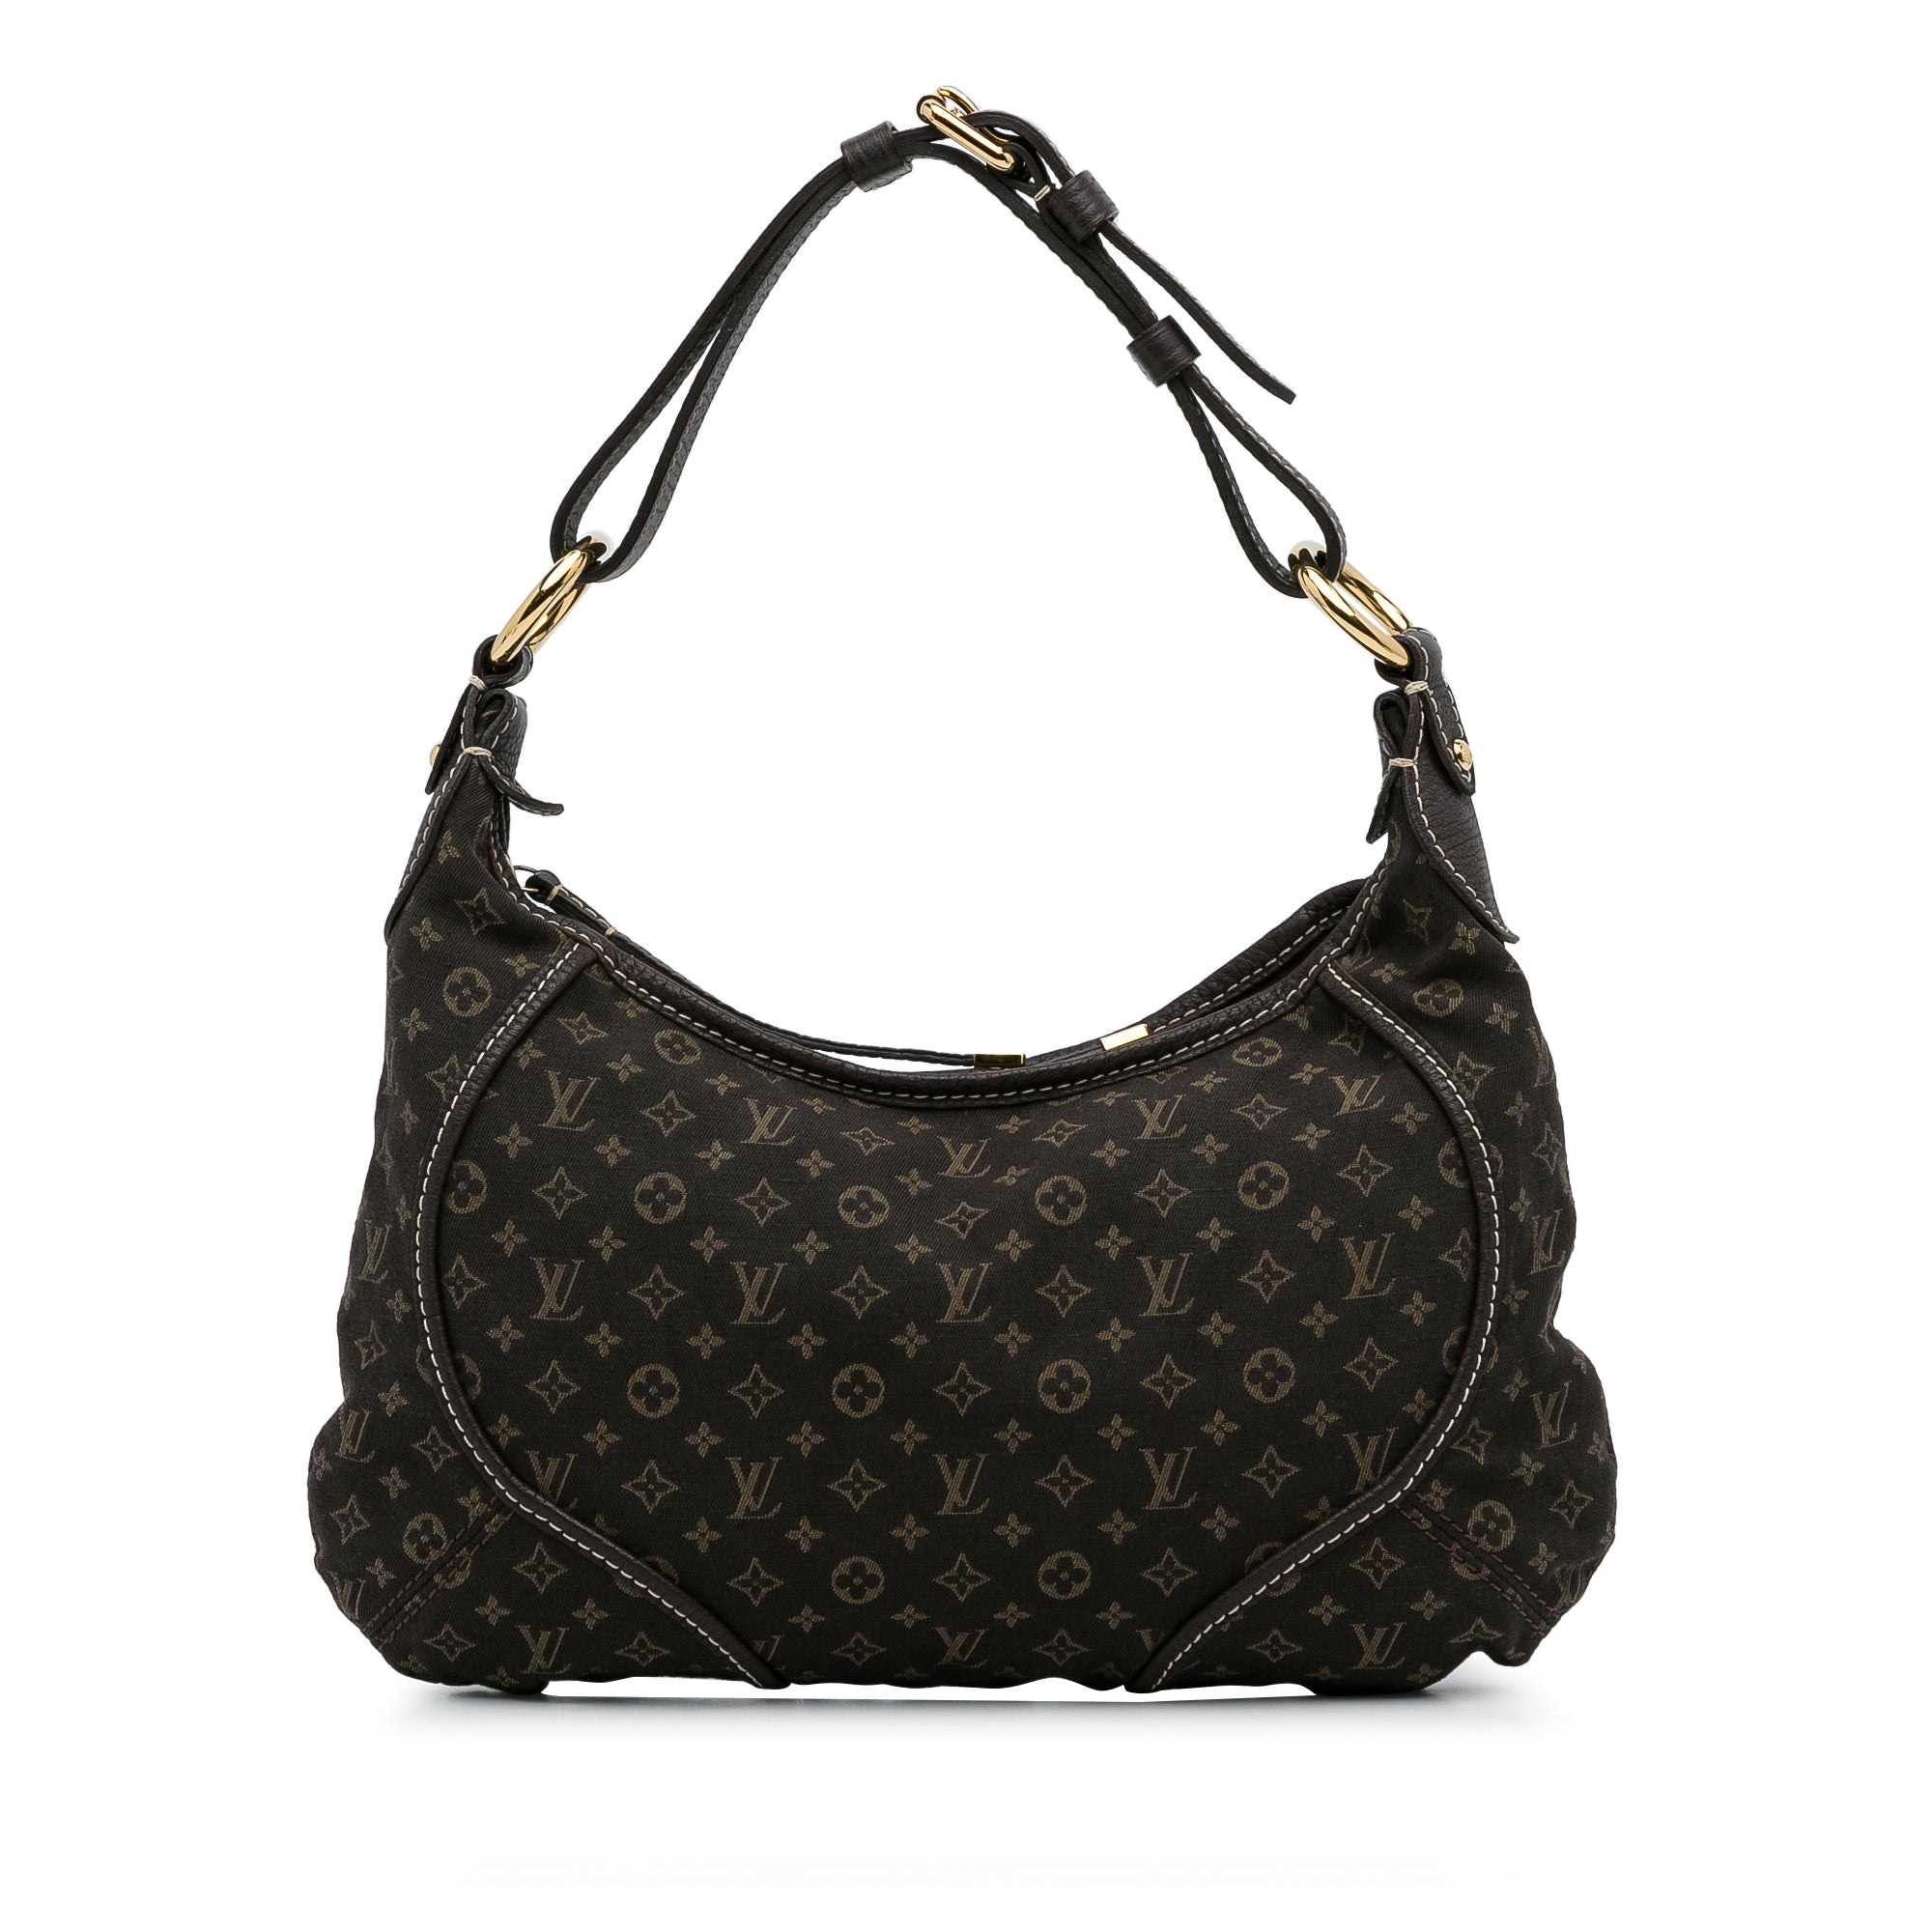 Discontinued Louis Vuitton bags - Uptown Consignment